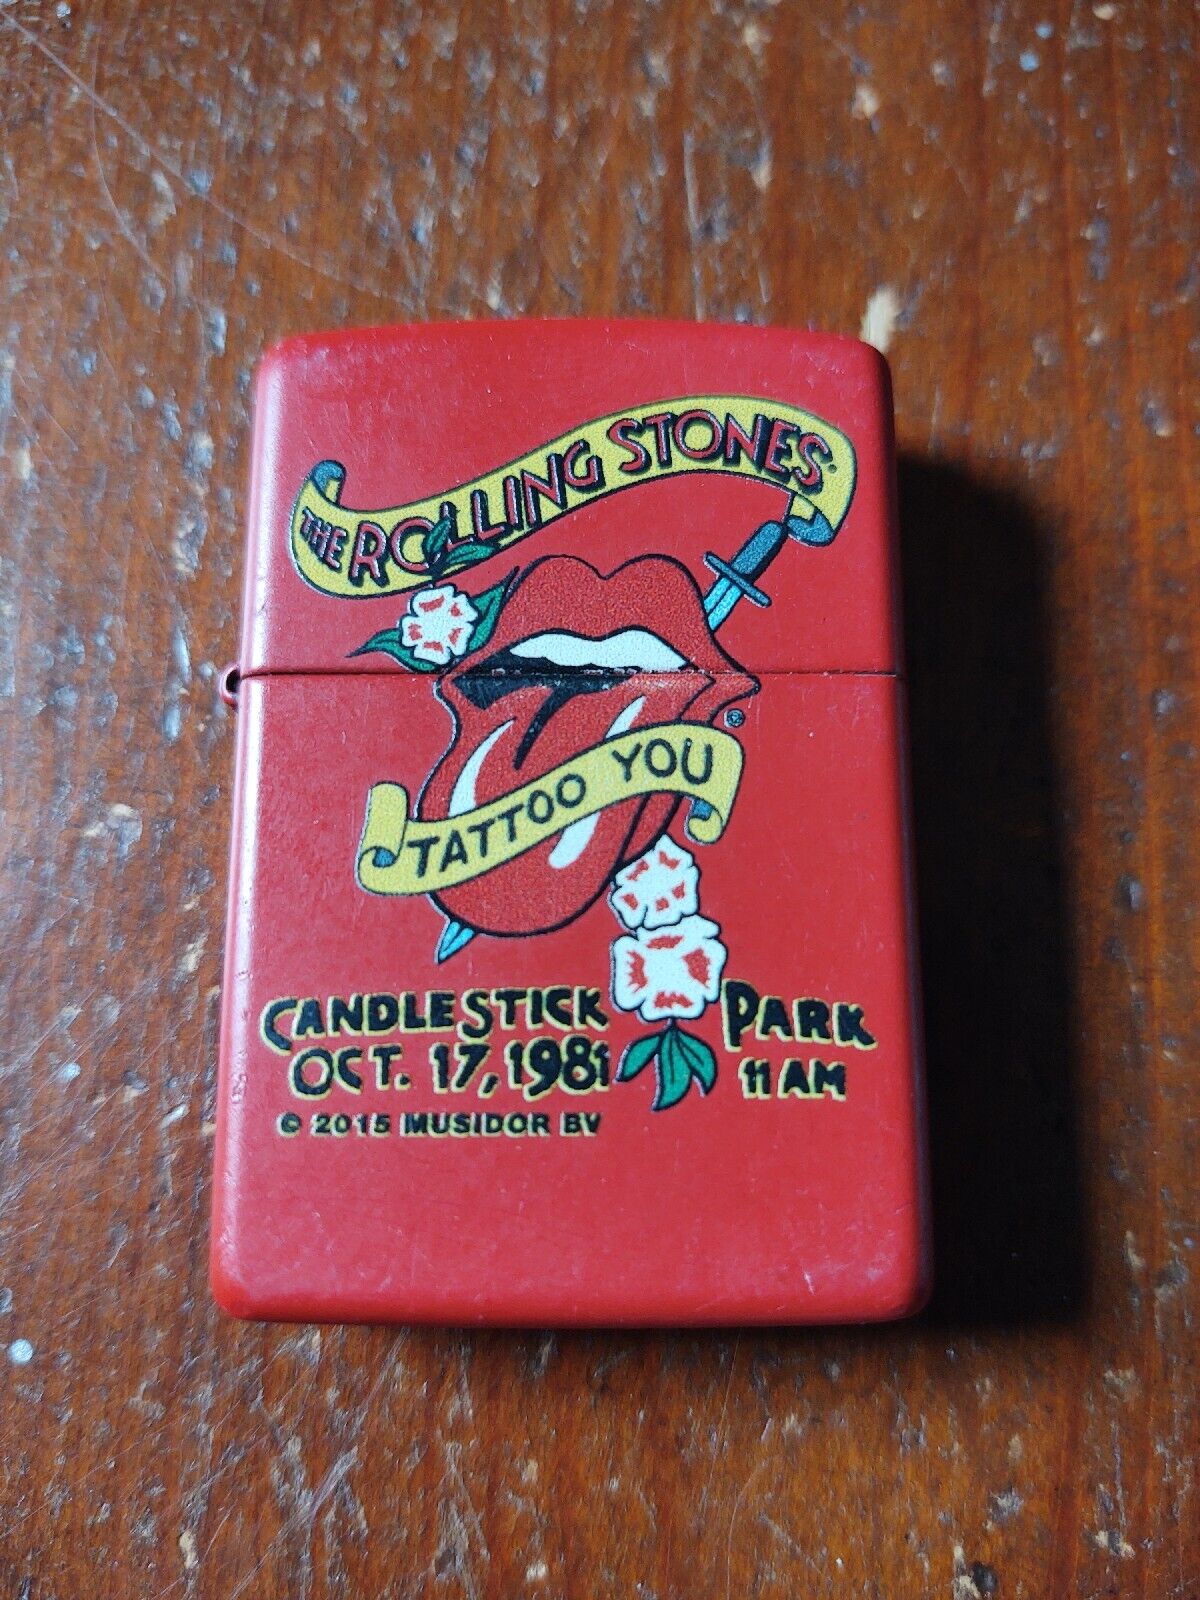 2015 ROLLING STONES TATTOO YOU RED ZIPPO LIGHTER MADE IN USA